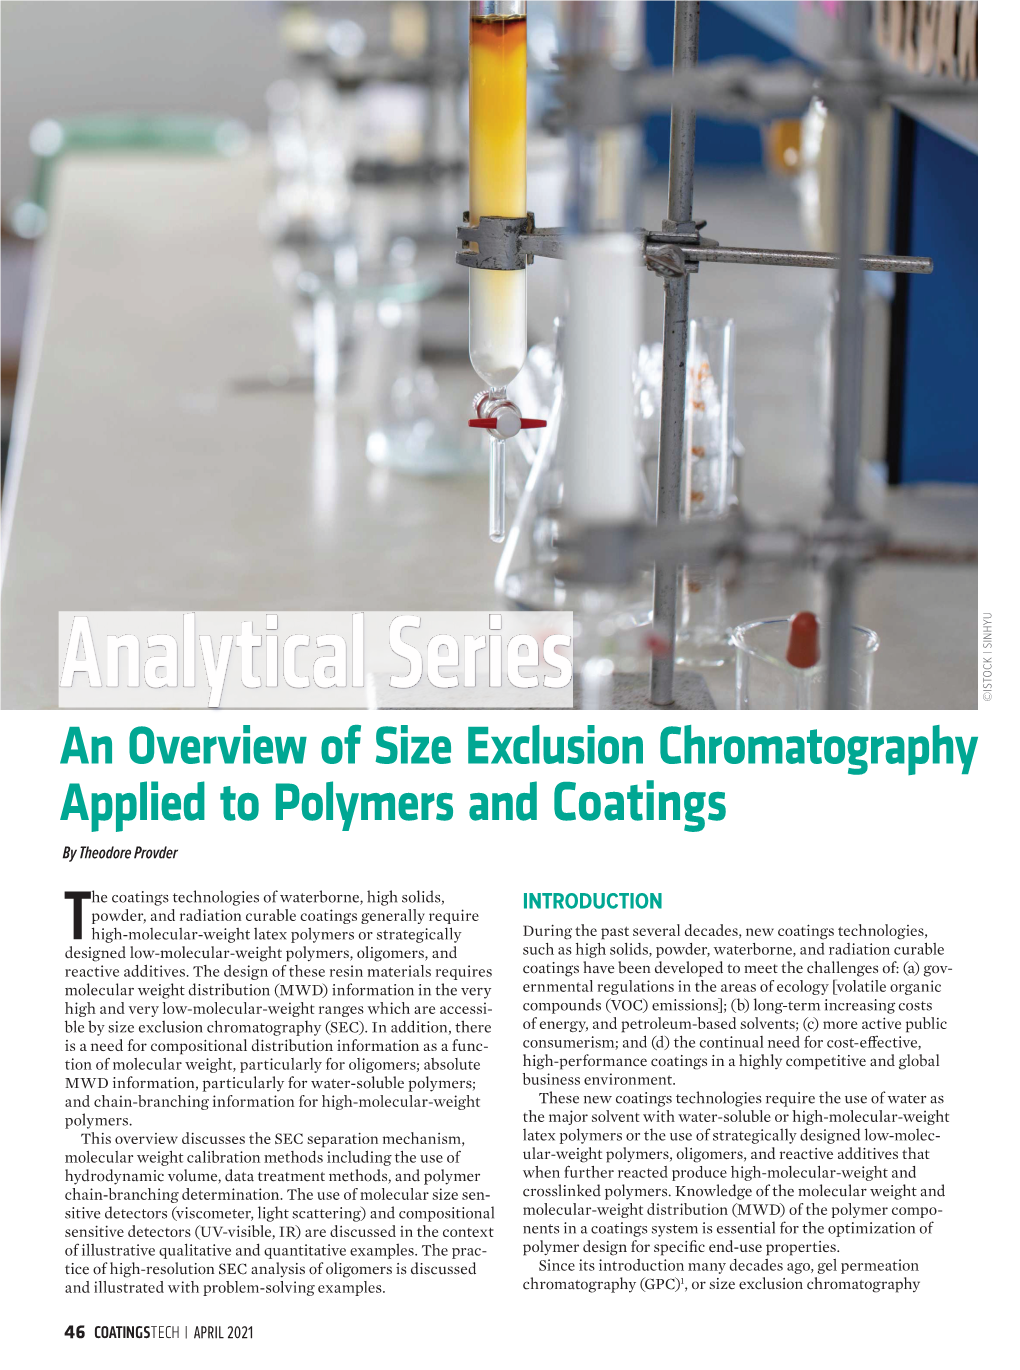 An Overview of Size Exclusion Chromatography Applied to Polymers and Coatings by Theodore Provder